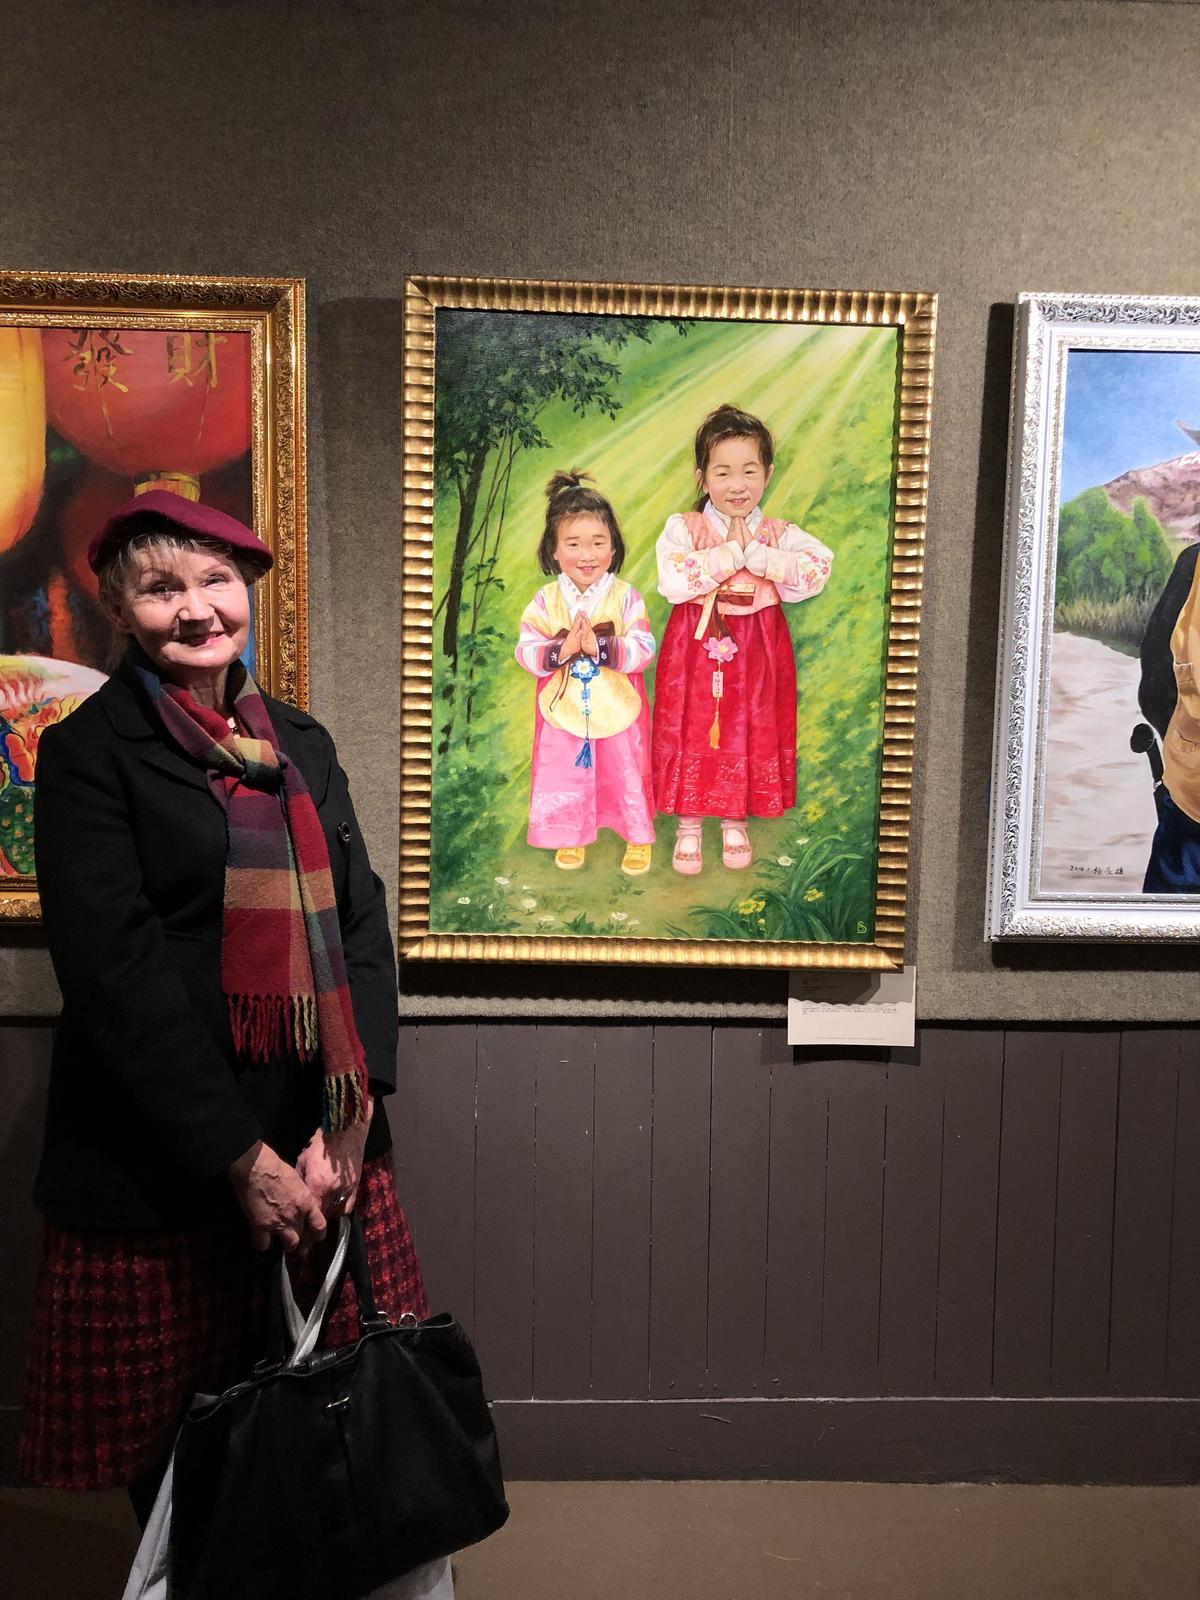 Barbara Schafer with her oil painting "Gratitude" on exhibition at the 2019 NTD International Figure Painting Competition in New York. (Courtesy of Barbara Schafer)